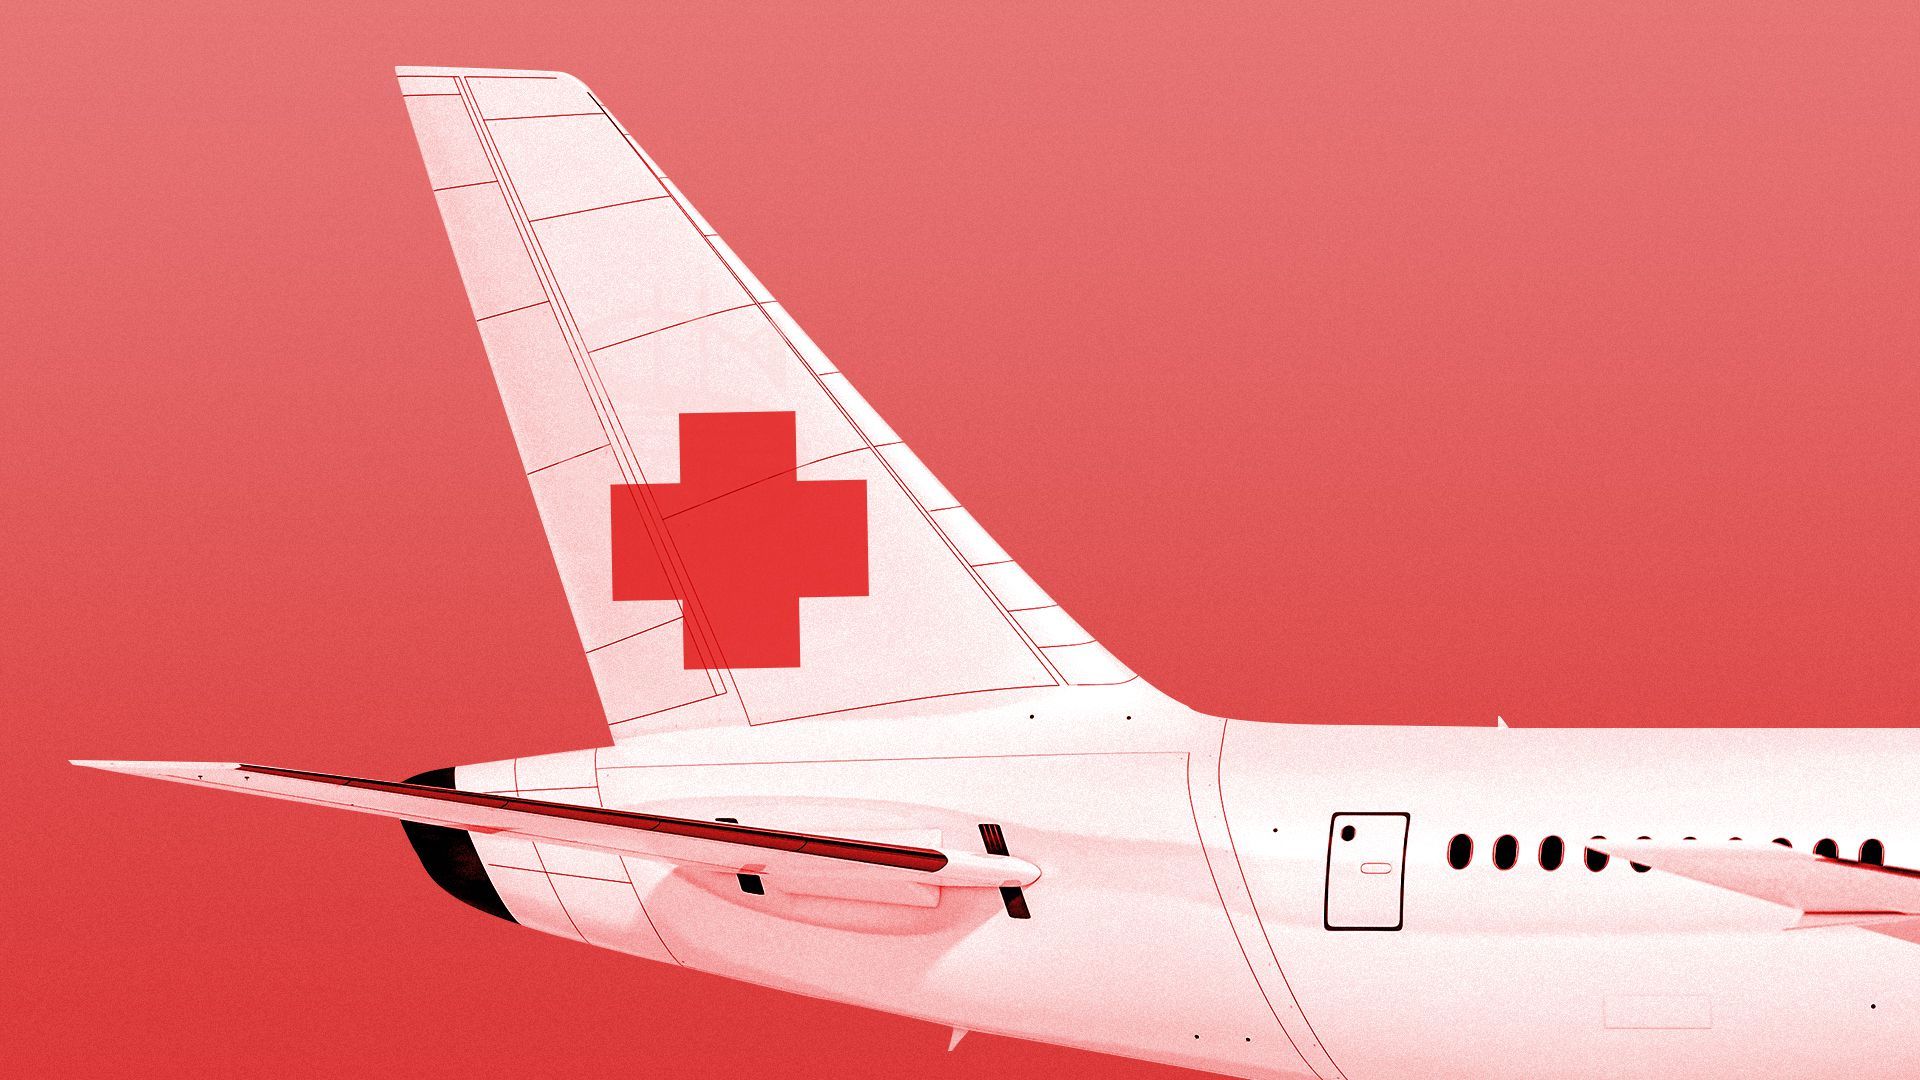 Illustration of a plane with a red cross on the tail.